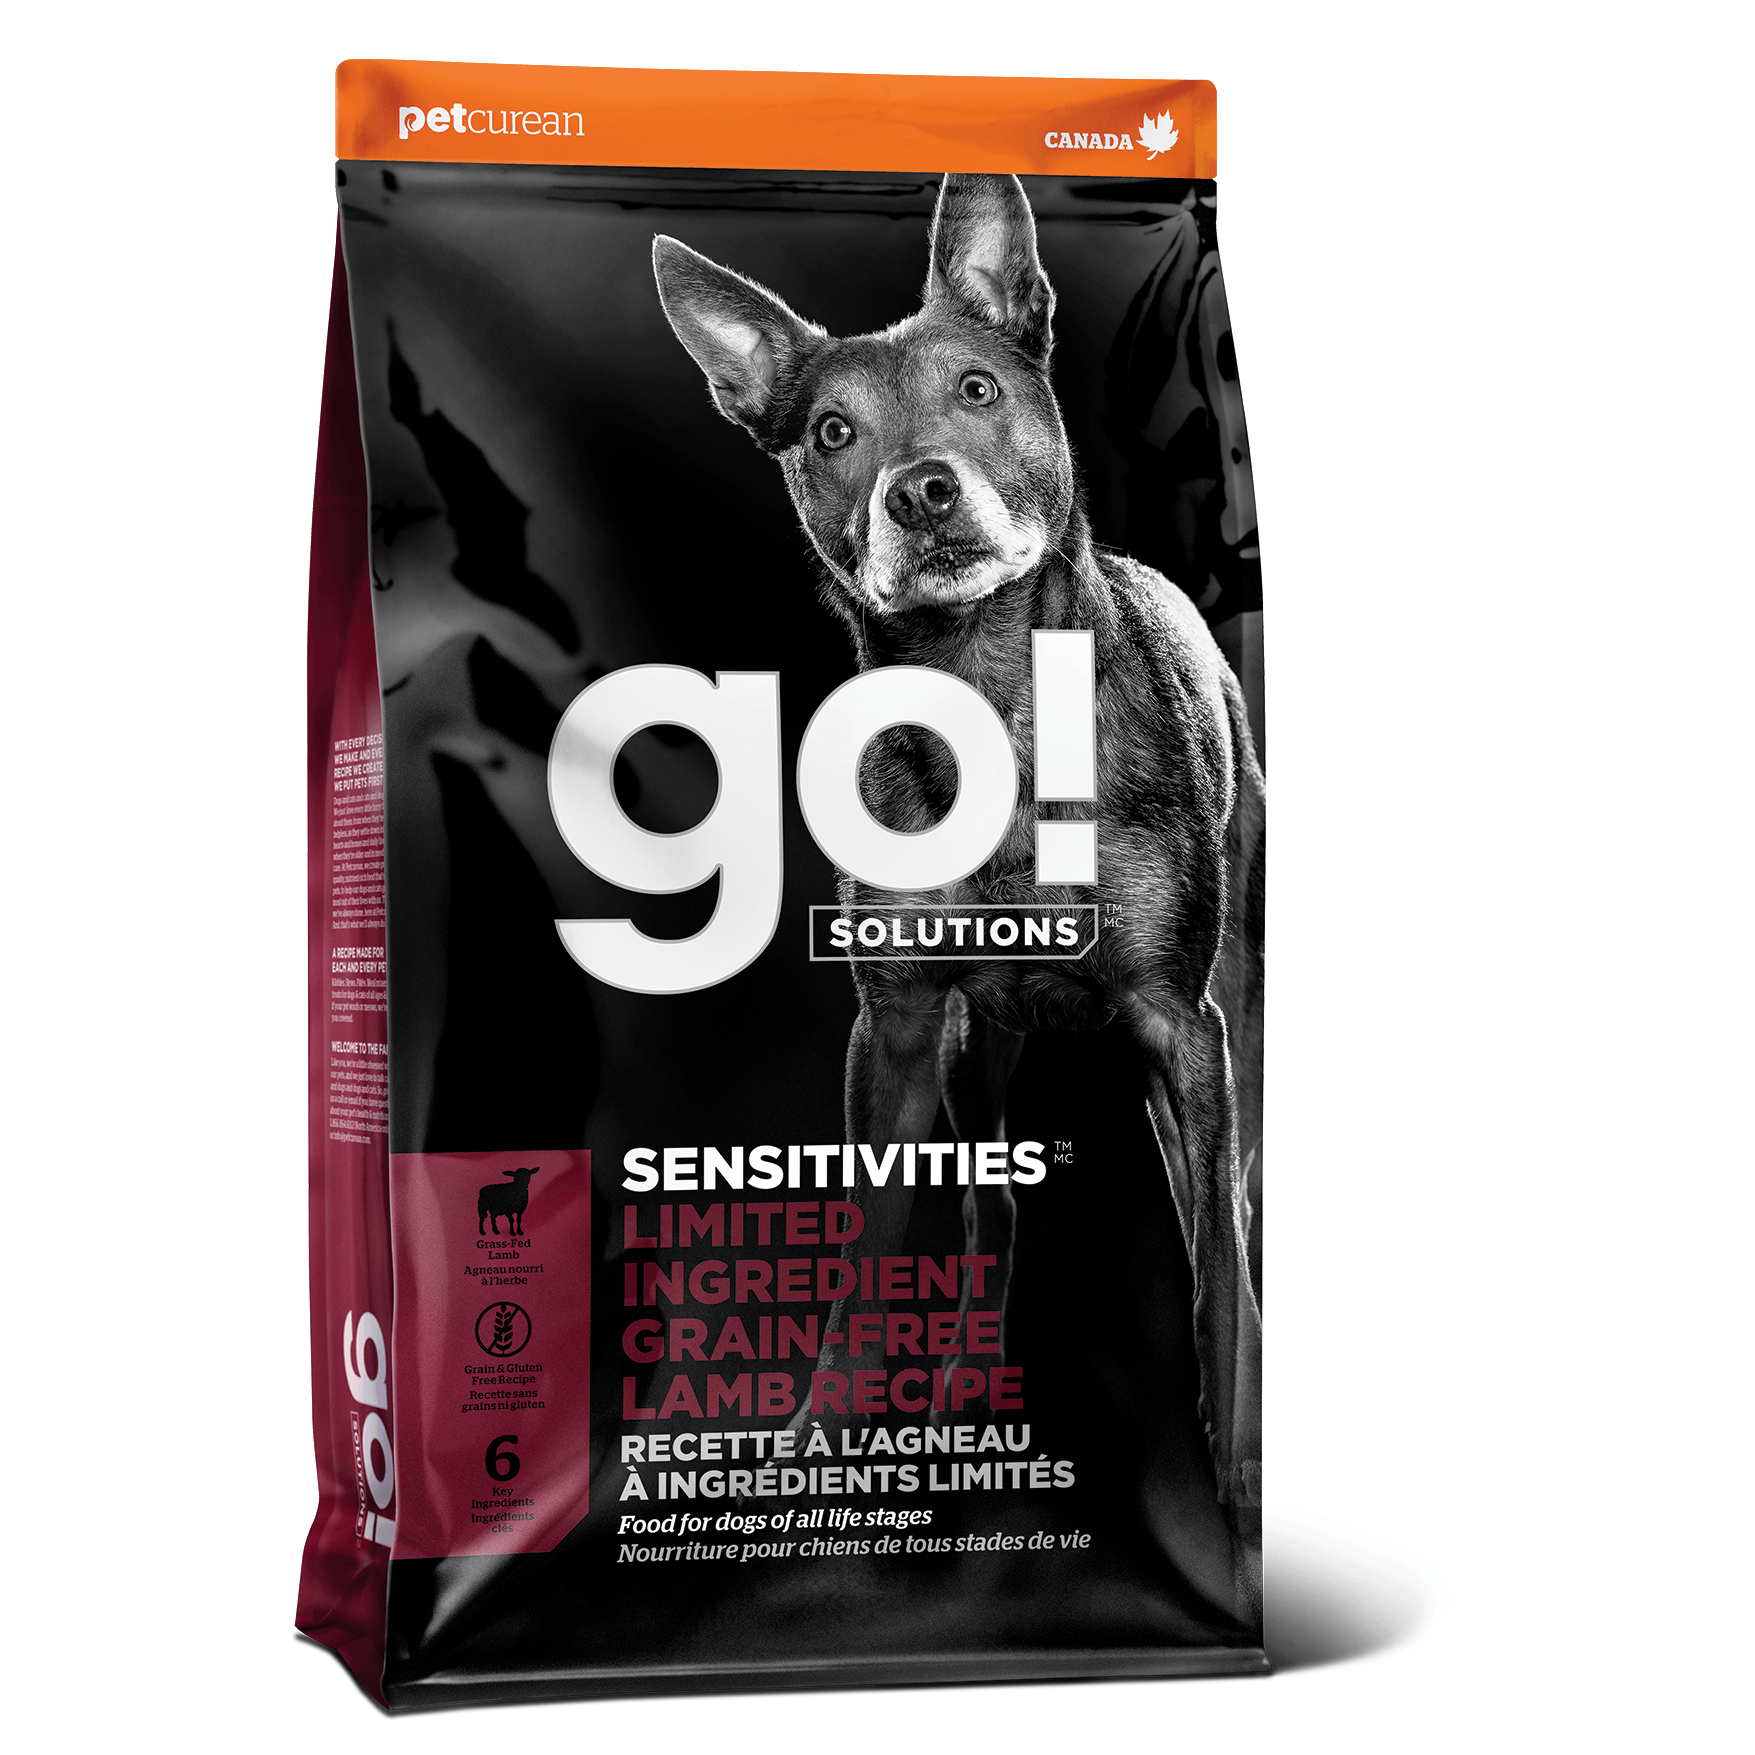 GO! SENSITIVITIES Limited Ingredient Grain Free Lamb recipe for dogs  Dog Food  | PetMax Canada